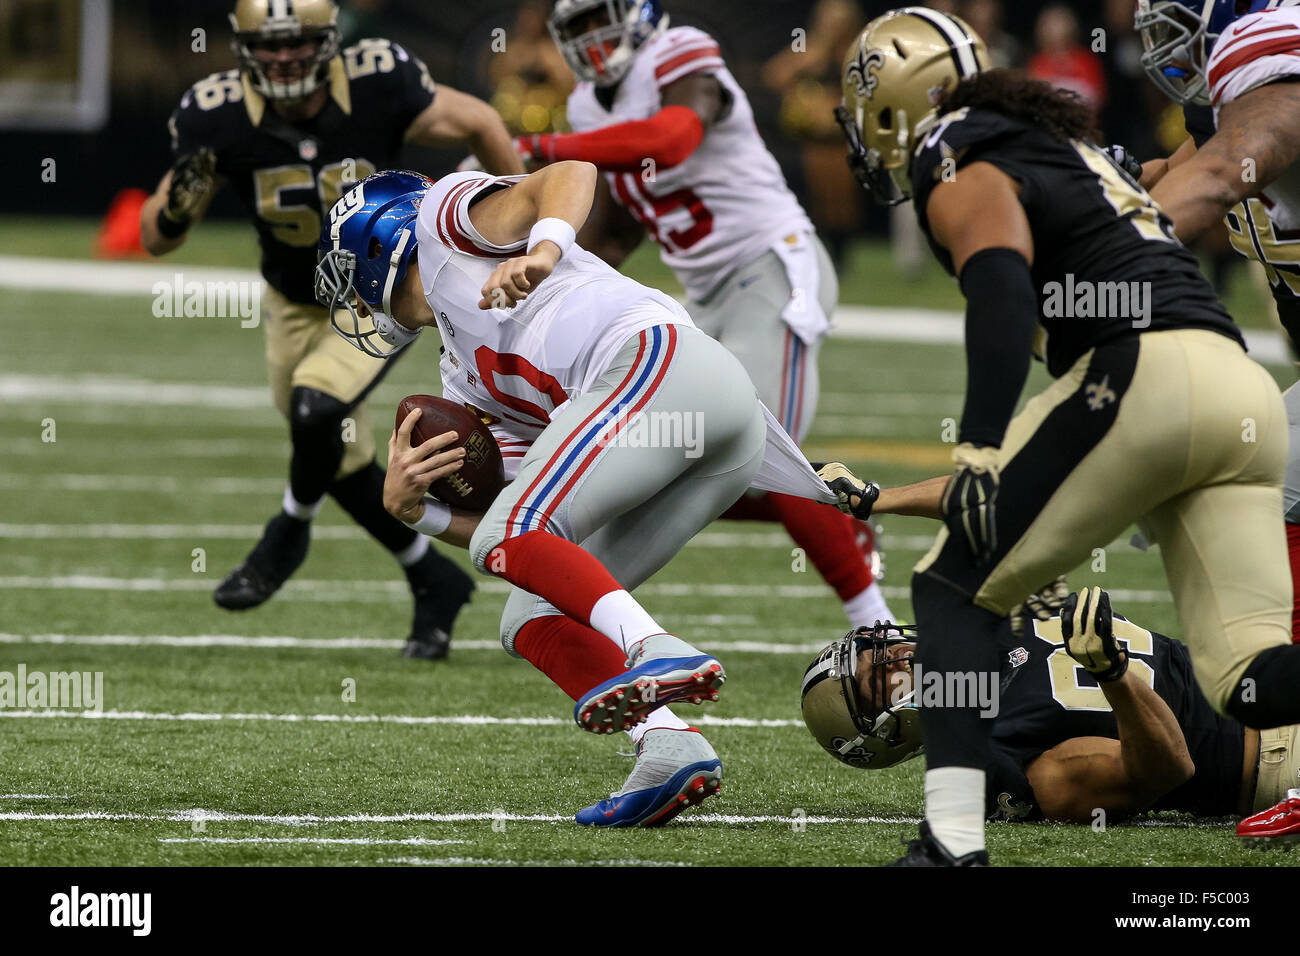 November 1, 2015 - New York Giants quarterback Eli Manning (10) is sacked by New Orleans Saints outside linebacker Kasim Edebali (91) during the game between the New Orleans Saints and the New York Giants at the Mercedes-Benz Superdome in New Orleans, LA. Stephen Lew/CSM Stock Photo